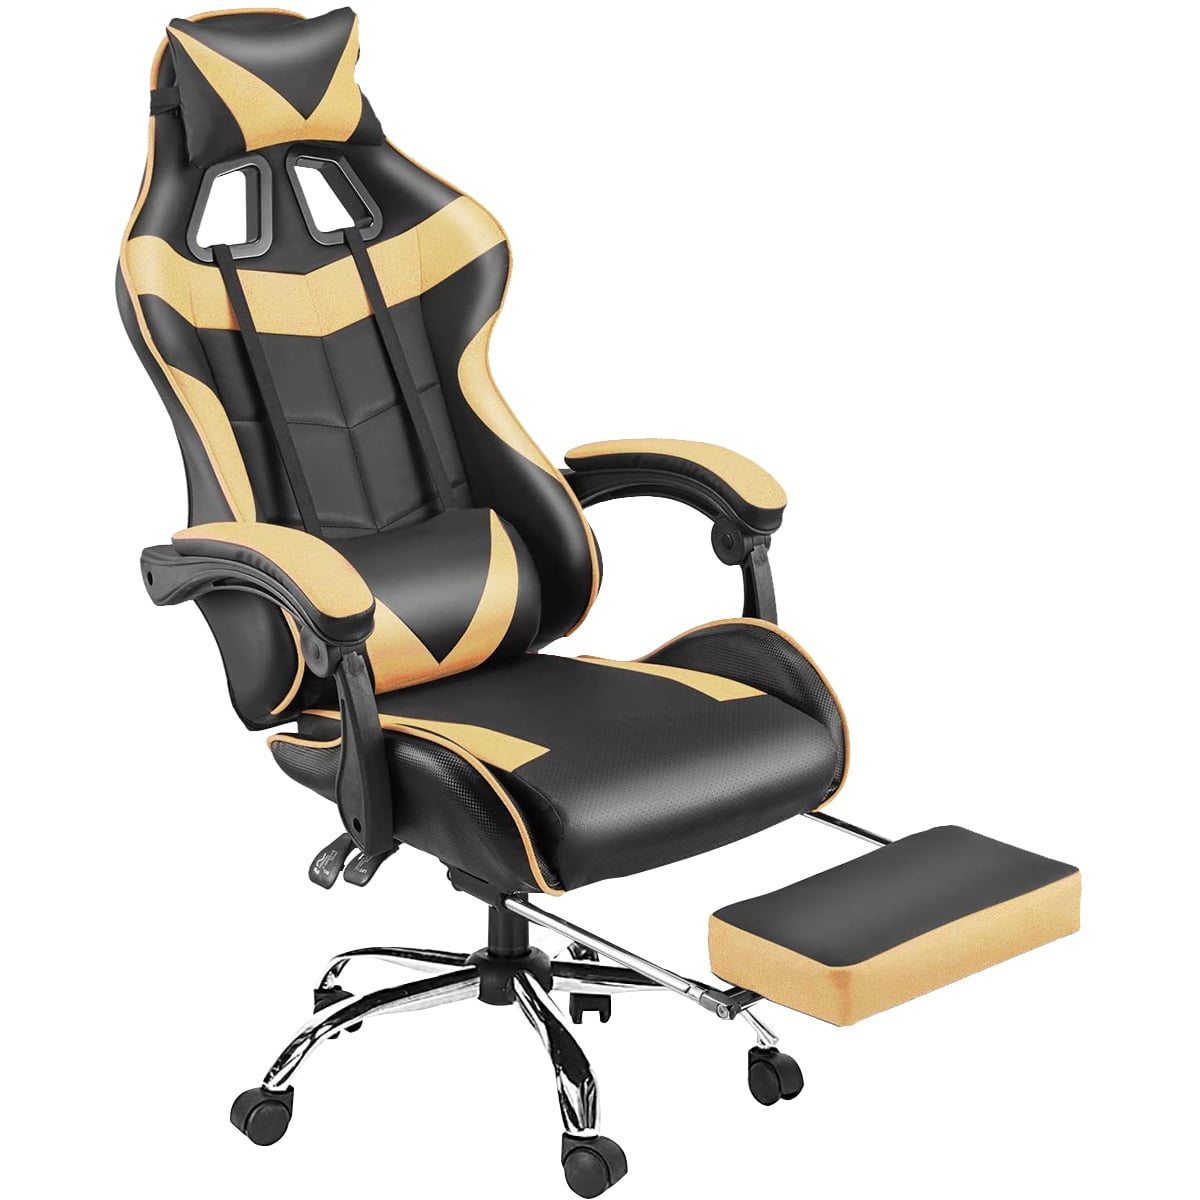 Details about   Gaming Chair Racing Office Computer Desk Swivel Ergonomic Breathable PU Leather 